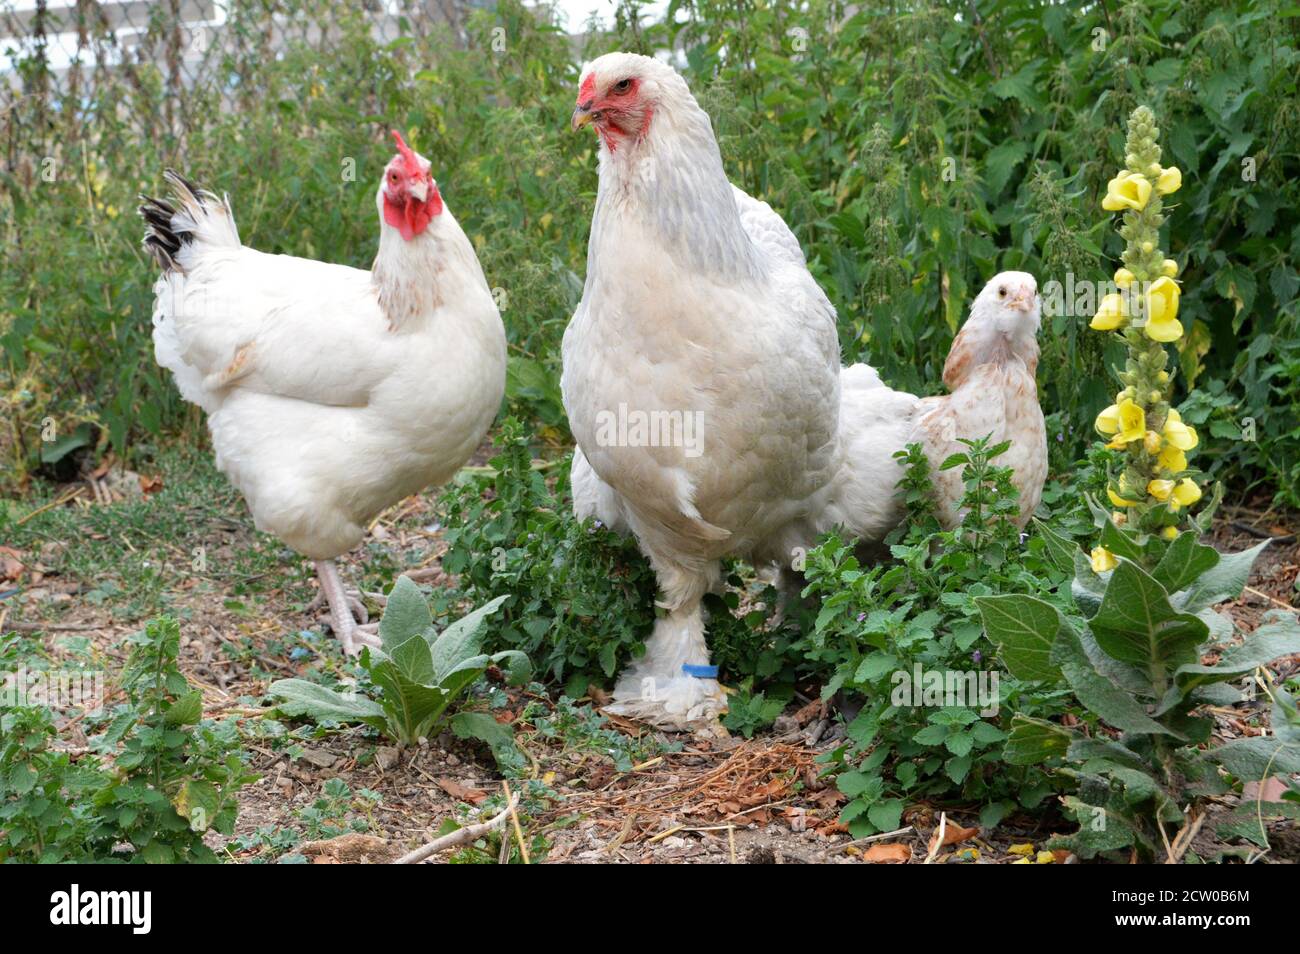 Beautiful Brahma chicken with her chick , in a hen house or